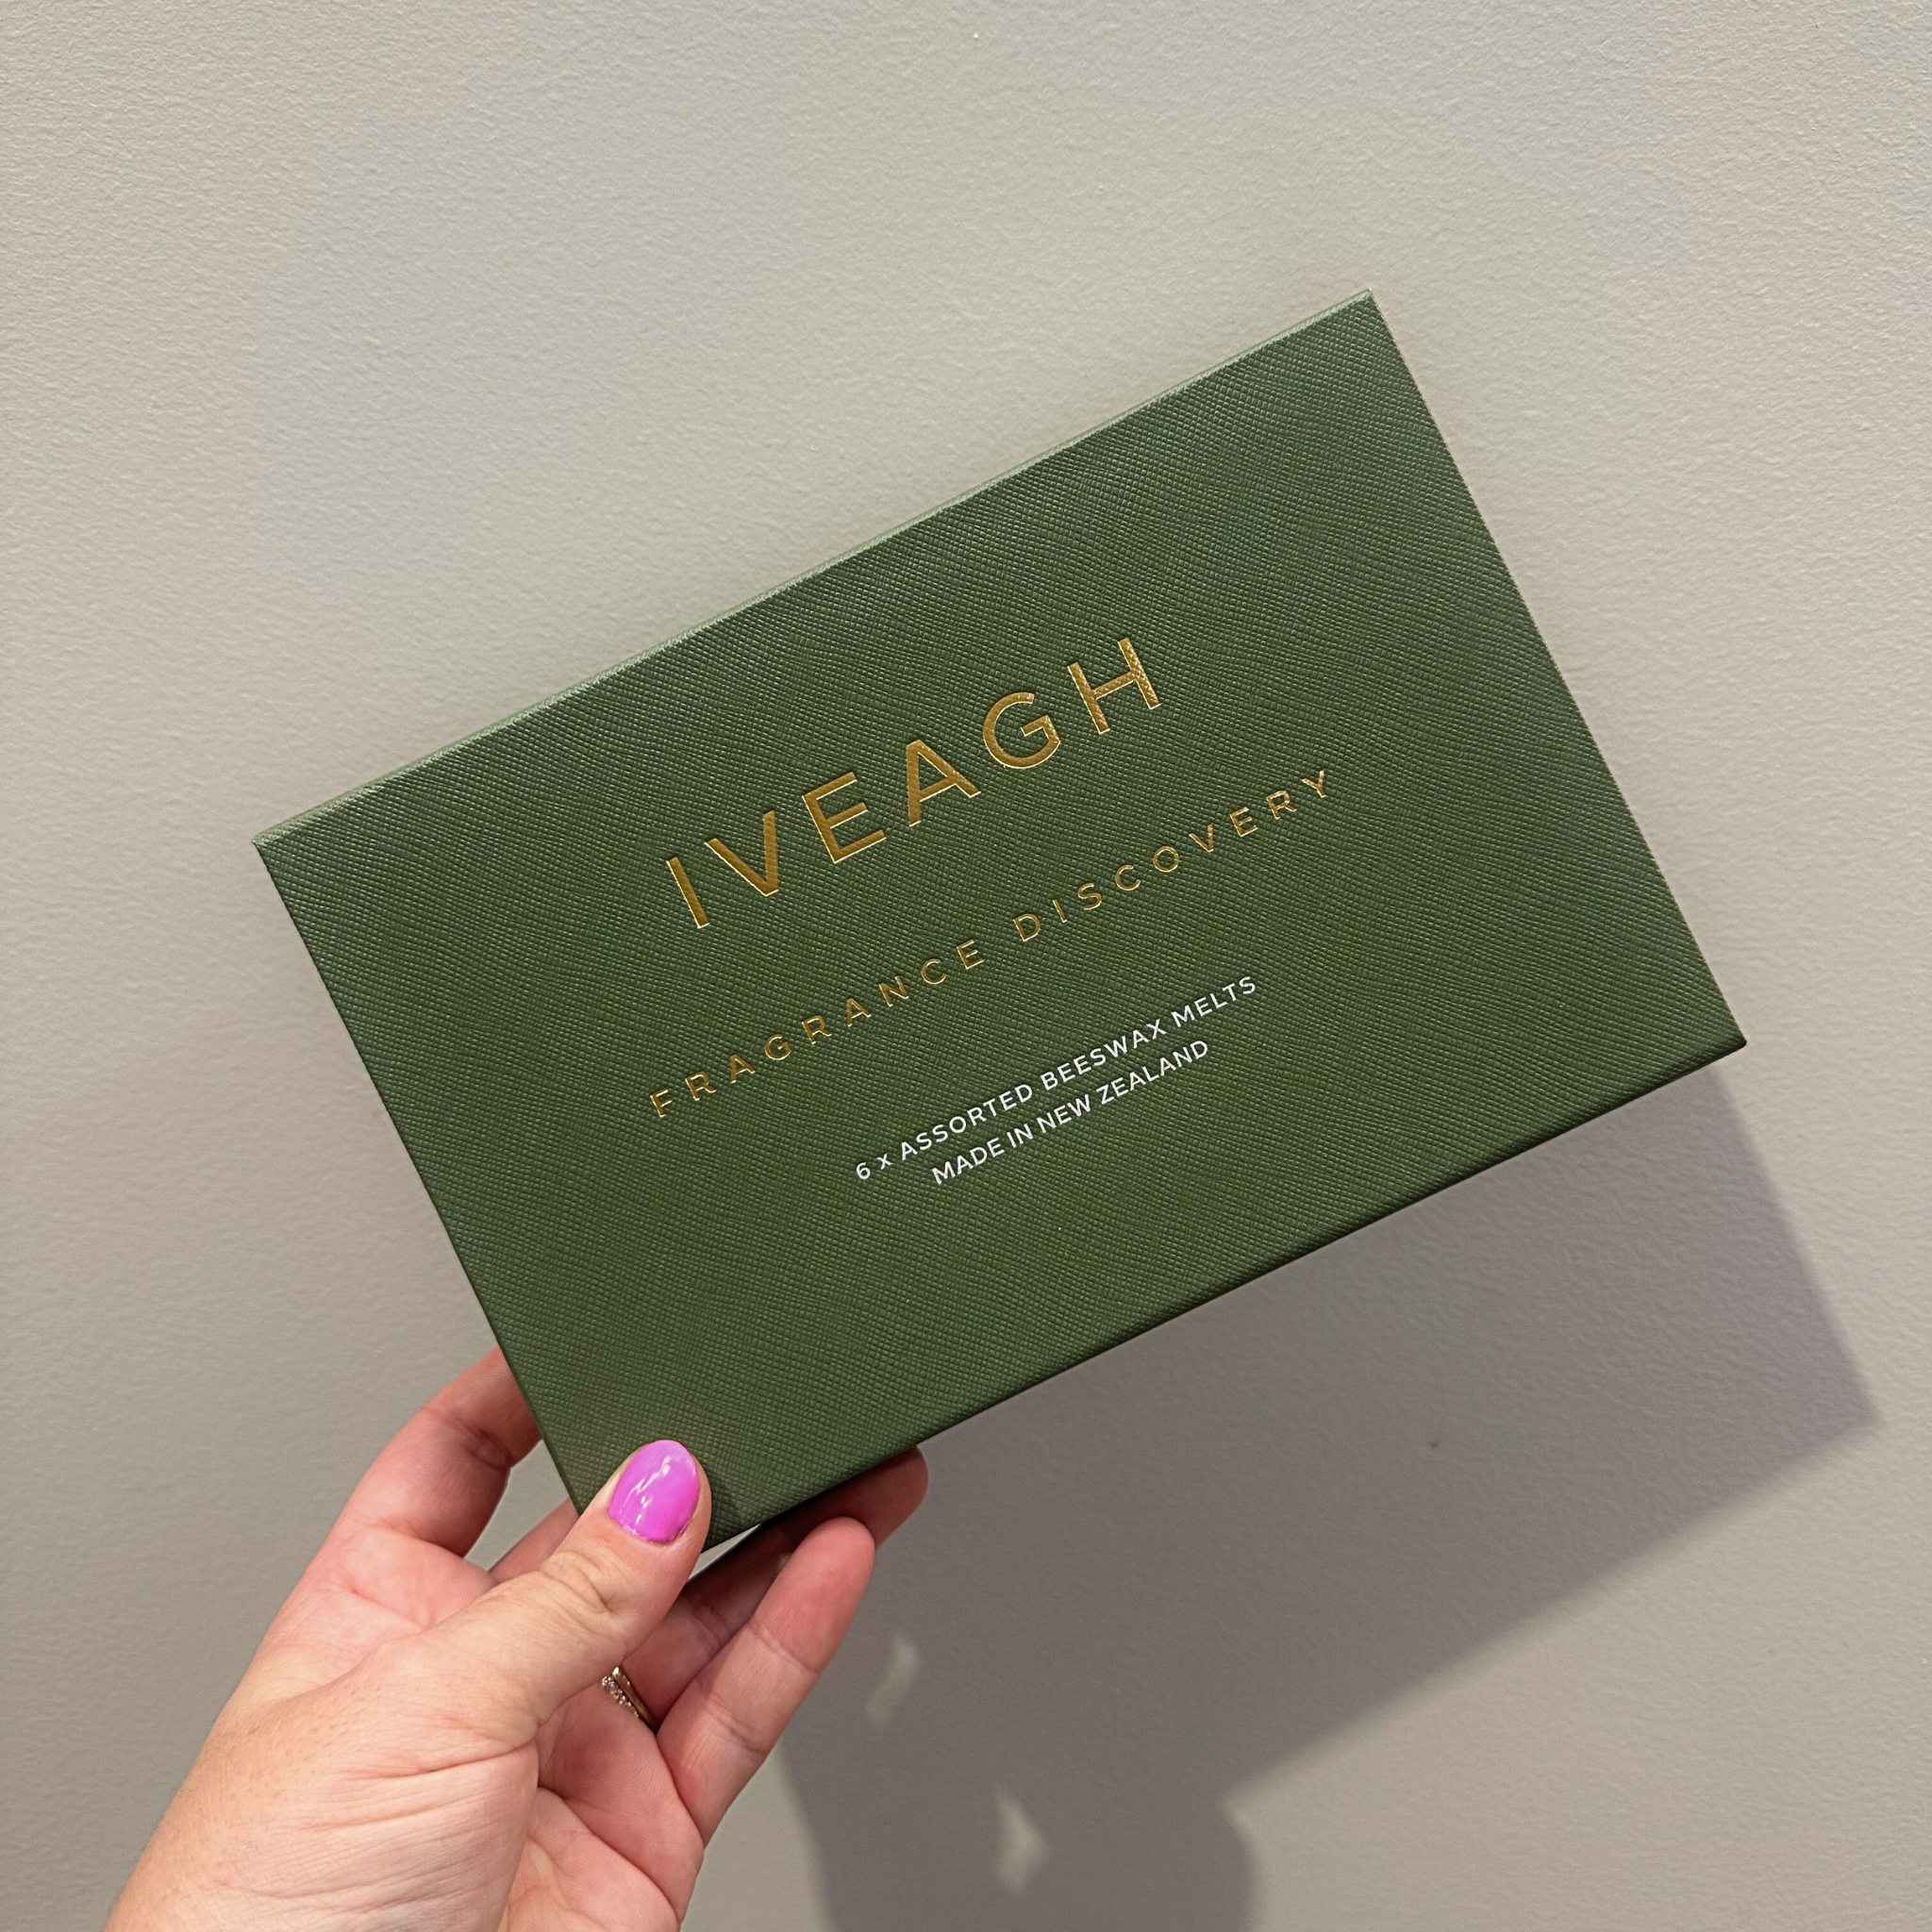 IVEAGH - Fragrance Discovery Kit